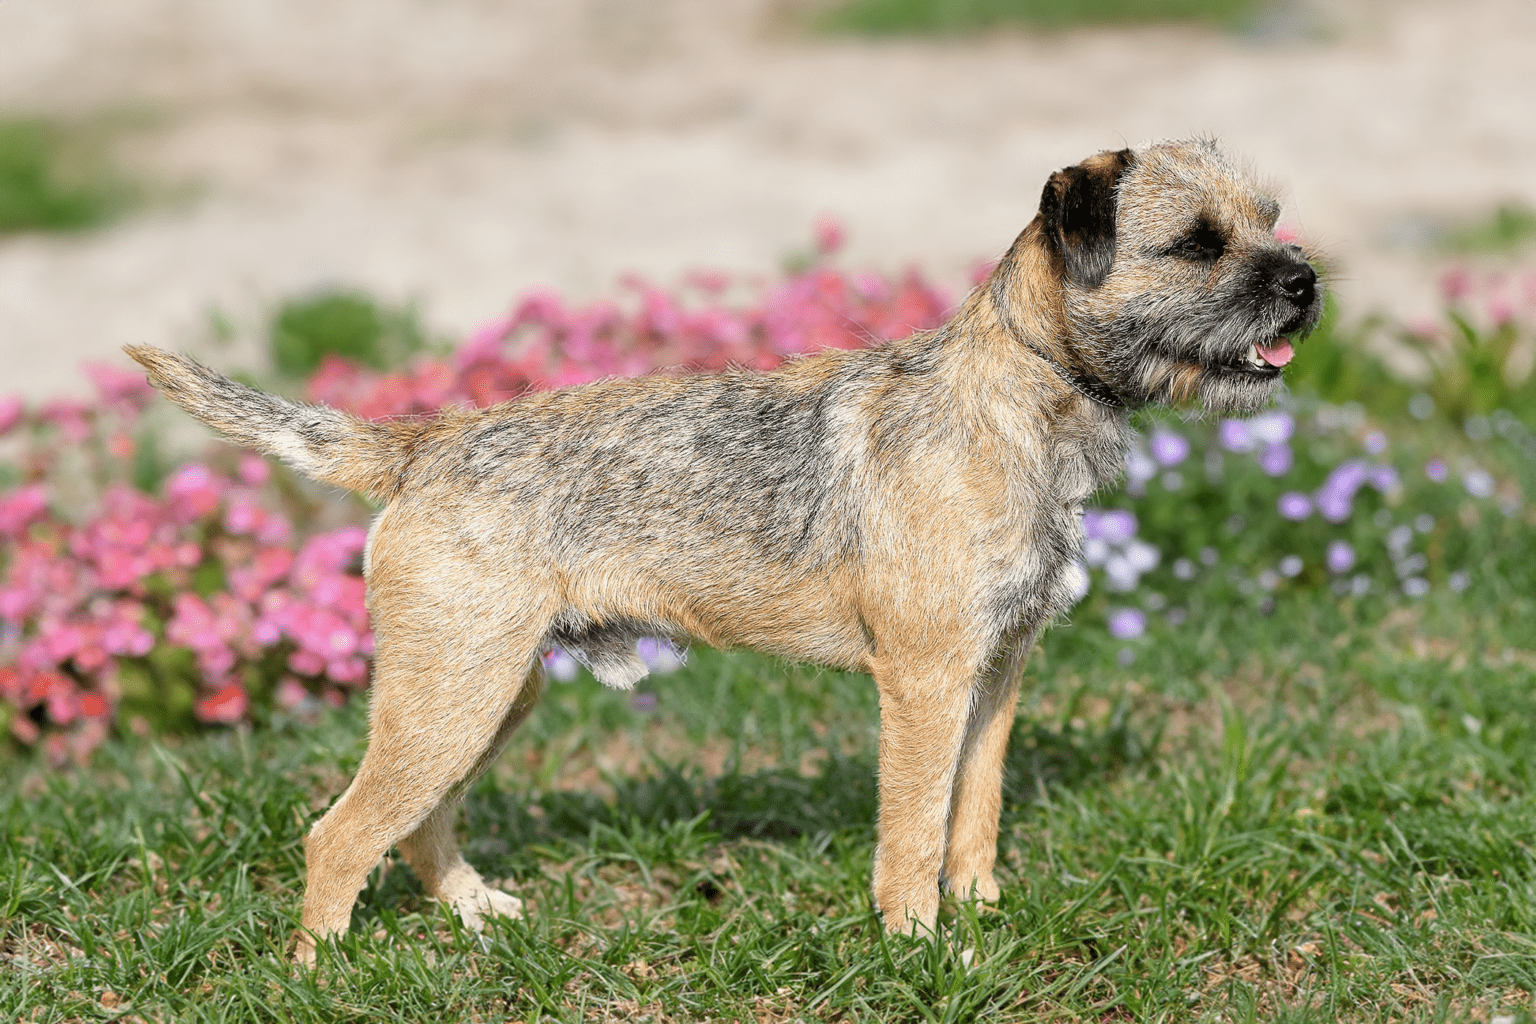 The Border Terrier originated from the rugged country along the border between Northumberland and Scotland. They are undoubtedly related to the other terriers which originated from this same region as Bedlington Terriers and Dandie Dinmont Terriers